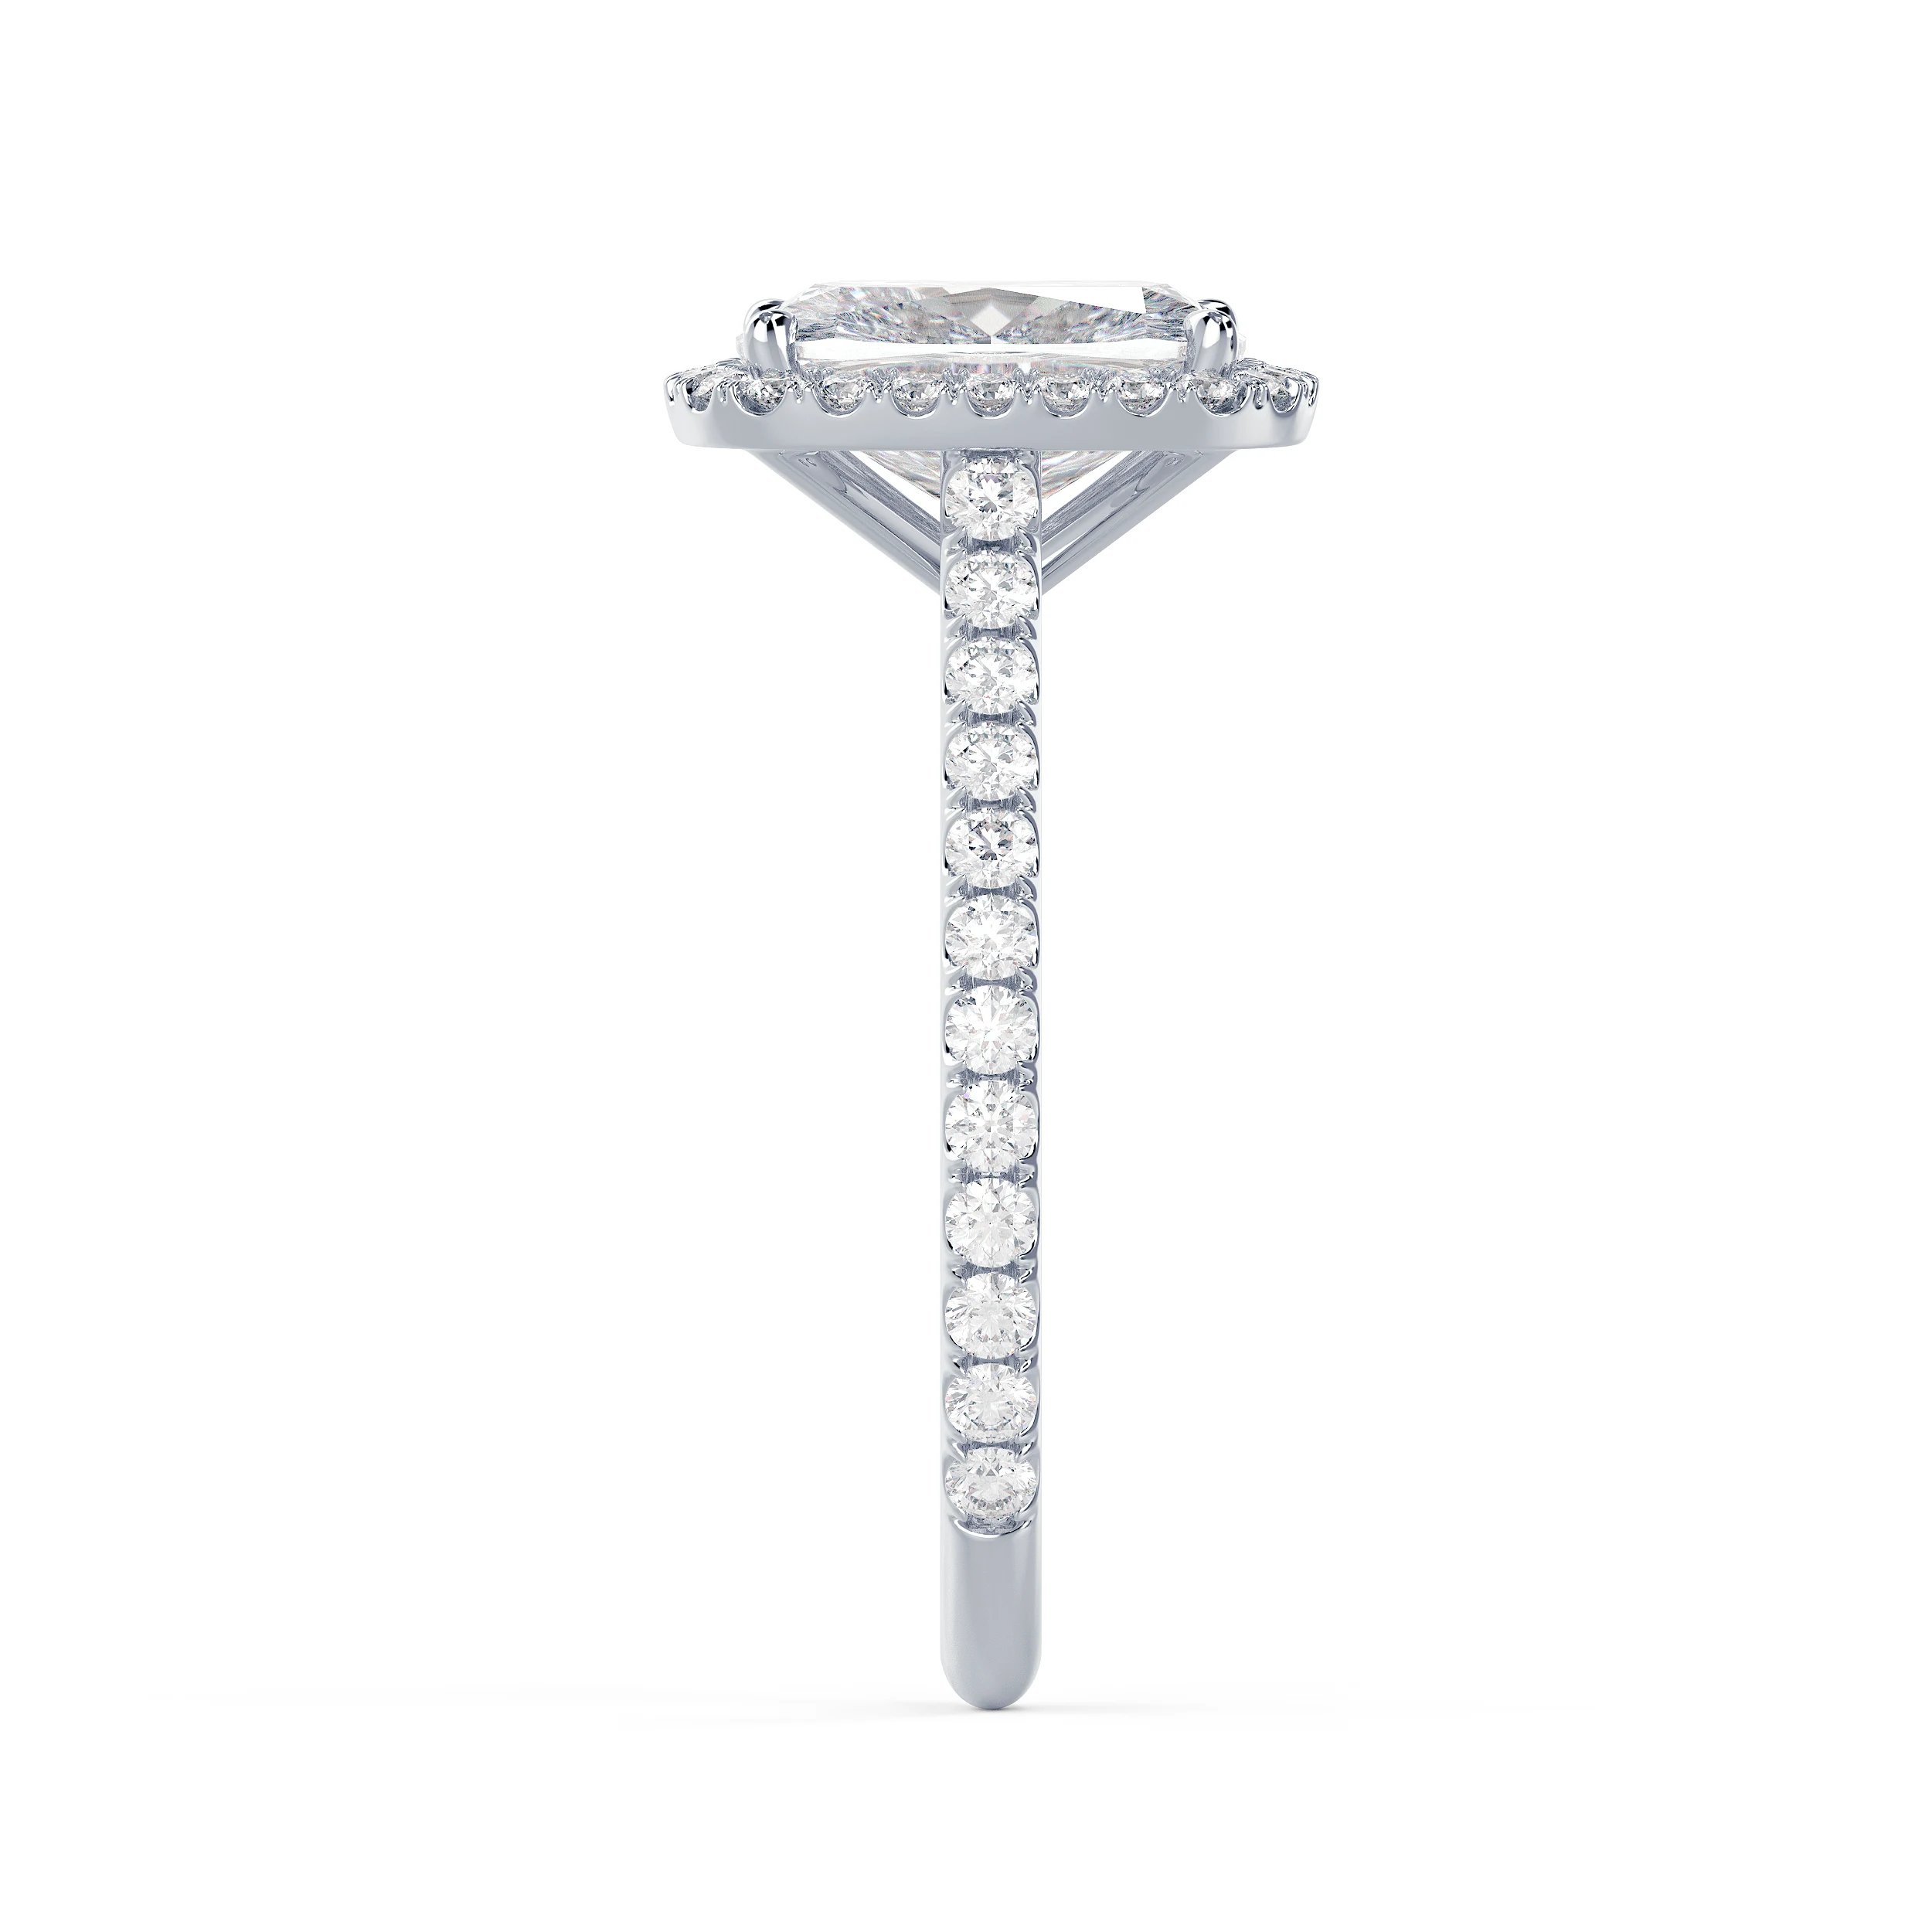 White Gold Cushion Halo Pavé Diamond Engagement Ring featuring Lab Diamonds (Side View)